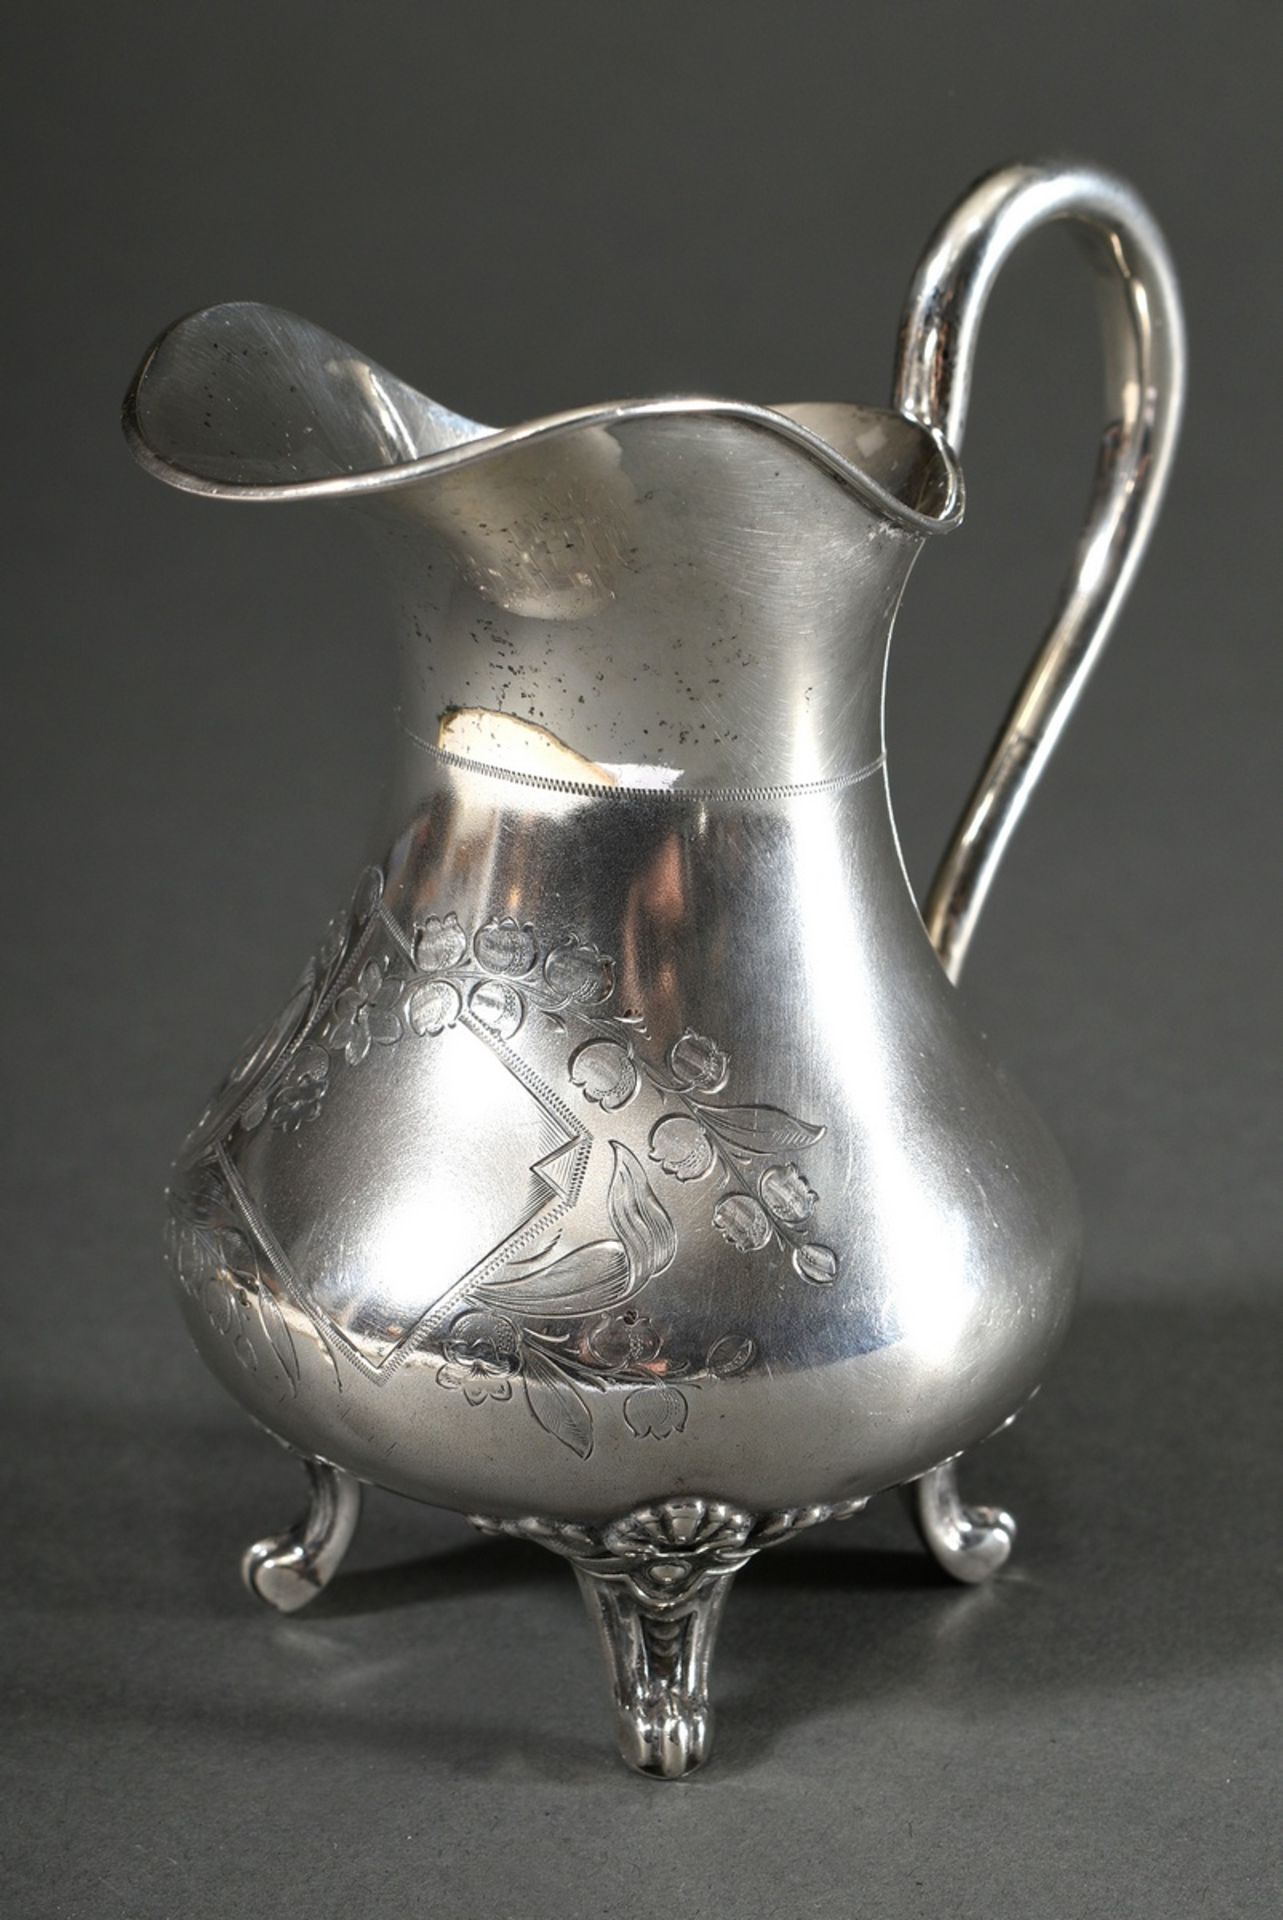 Cream jug with floral engraving "Lily of the Valley" on feet, c. 1890, Manufact. Emil Hofmann/Hambu